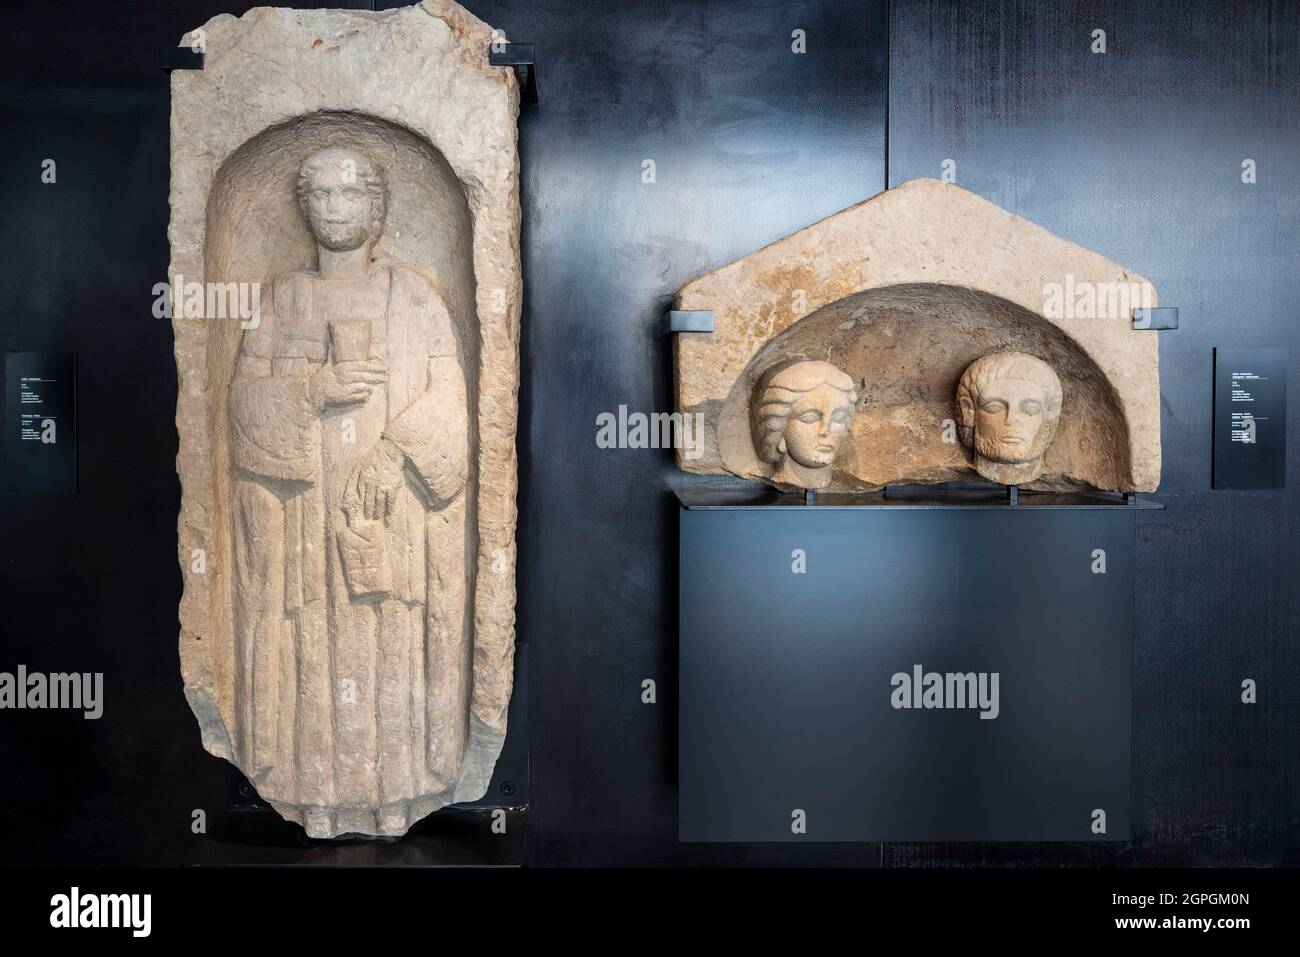 France, Haute Saone, Luxeuil les Bains, L'Ecclesia, Interpretation Centre of Architecture and Heritage built on an excavation site having uncovered a Merovingian crypt and its 150 sarcophagi, making the place one of the most important in eastern France Stock Photo